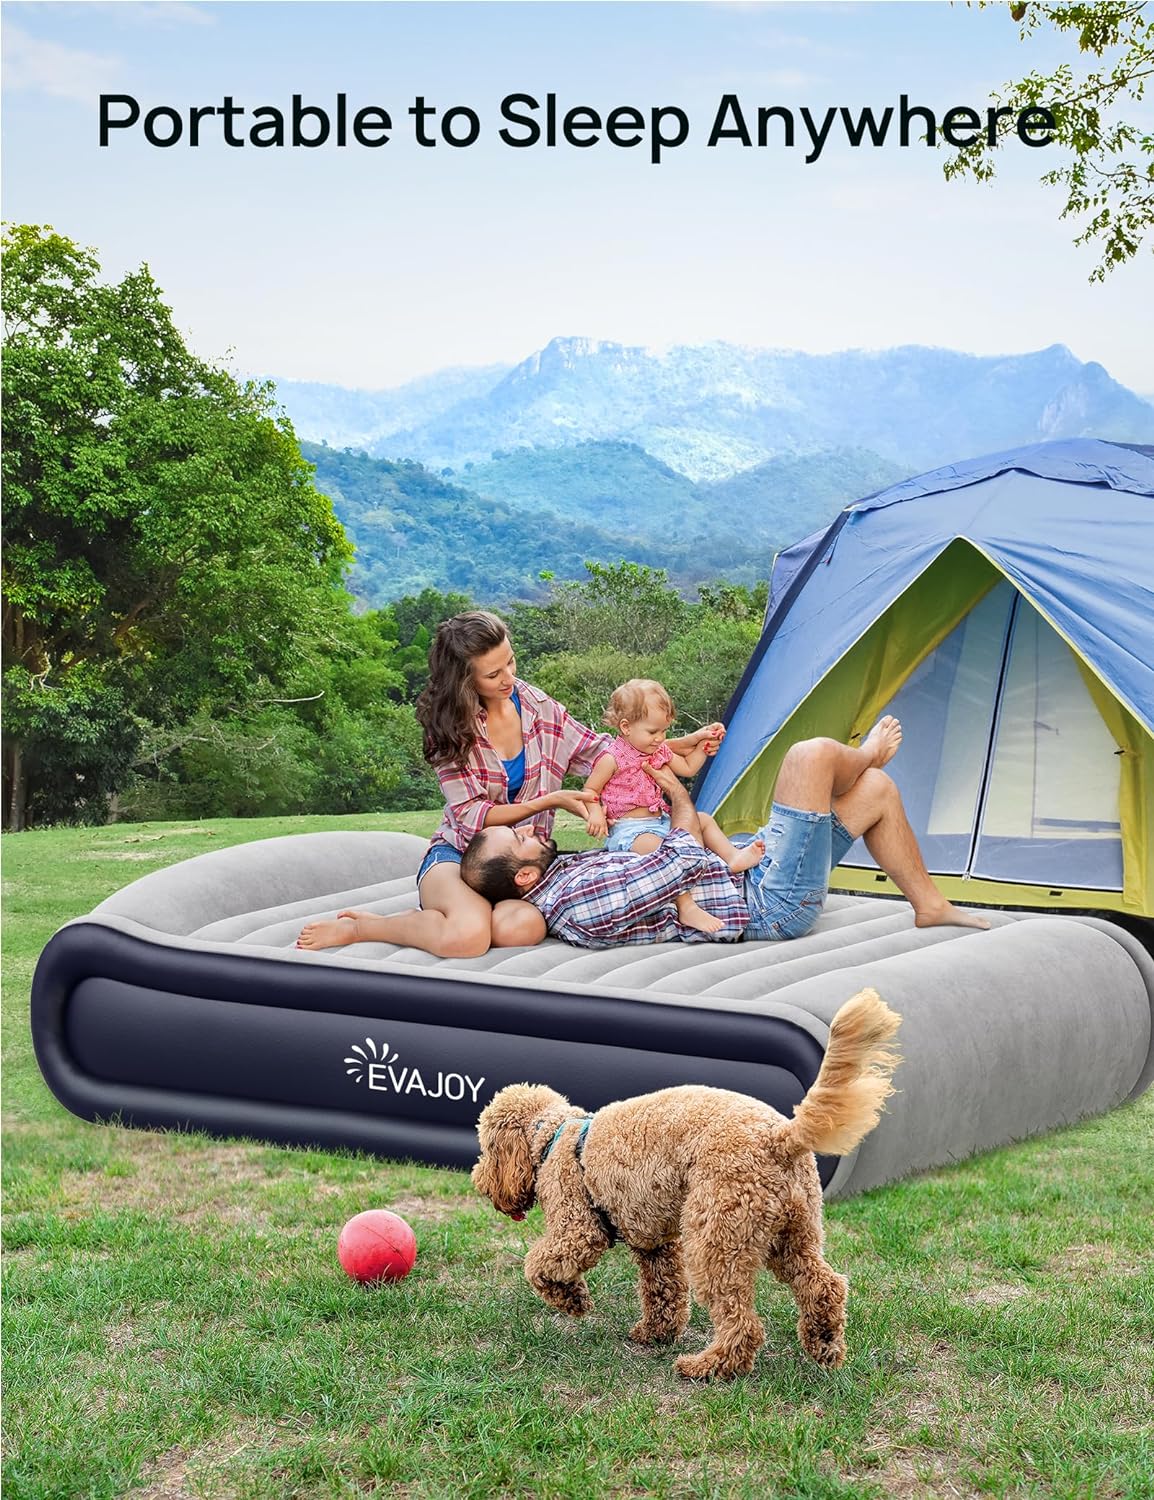 Evajoy Inflatable EJ-HF021 Outdoor Family Large Pool for Toddlers, Kids, Adults